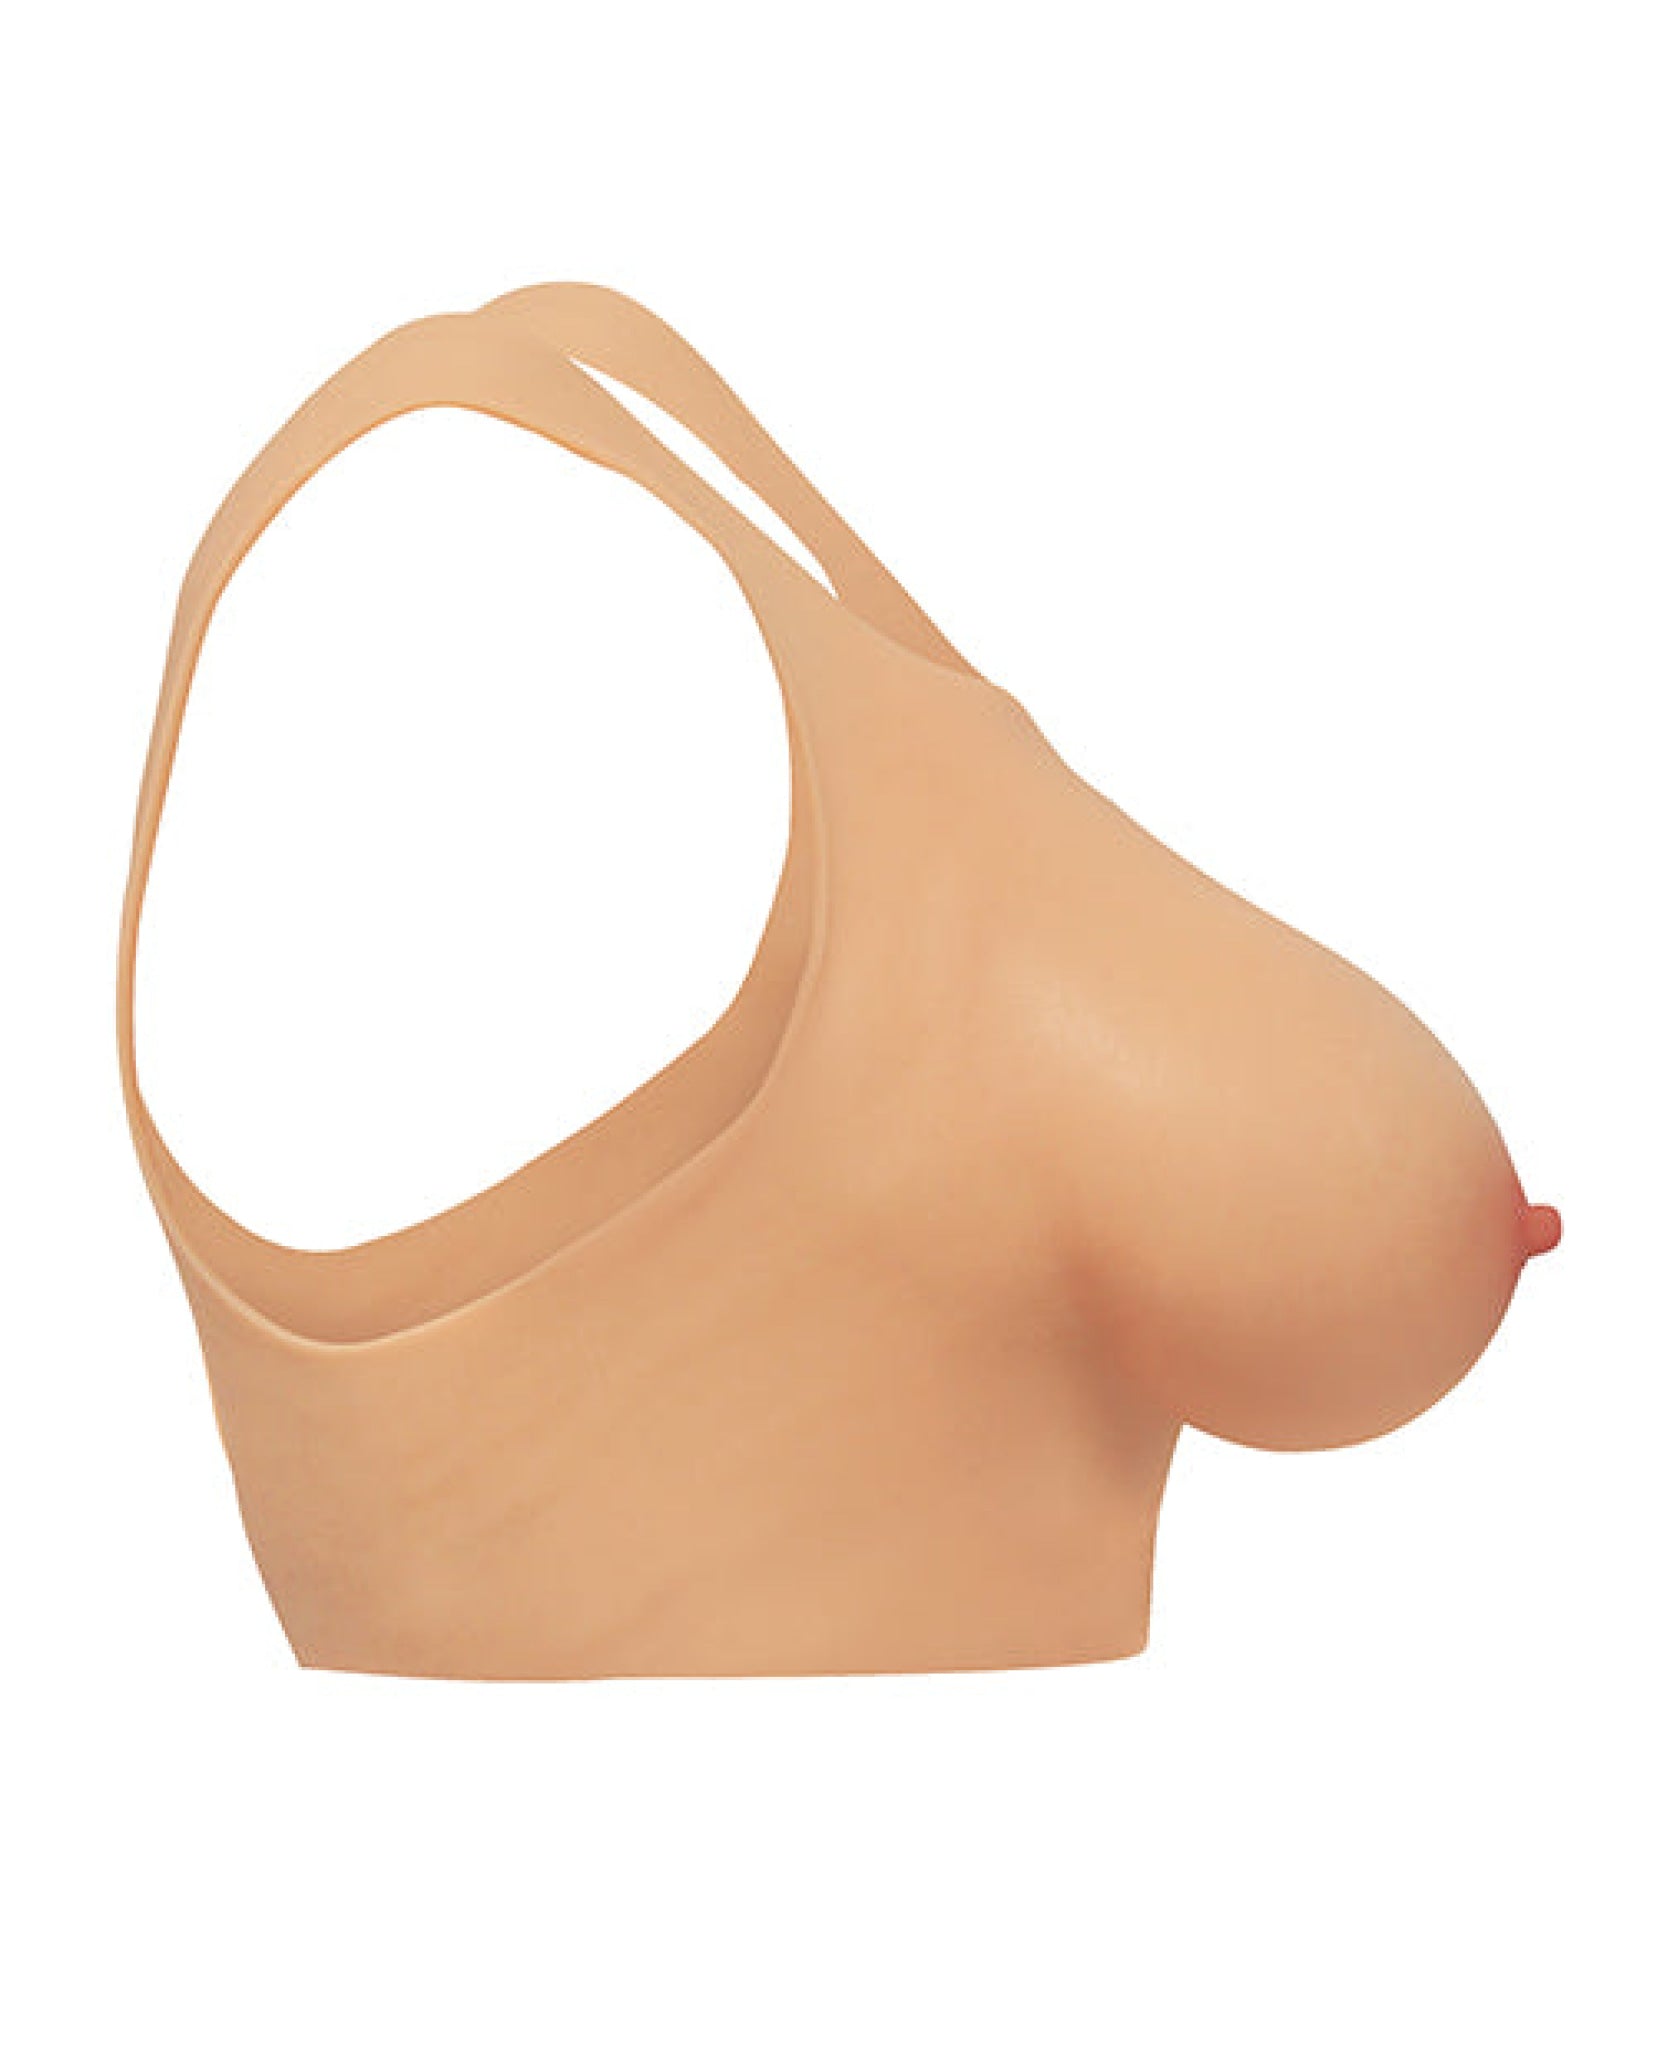 Master Series Perky Pair D Cup Silicone Breasts - Light Master Series